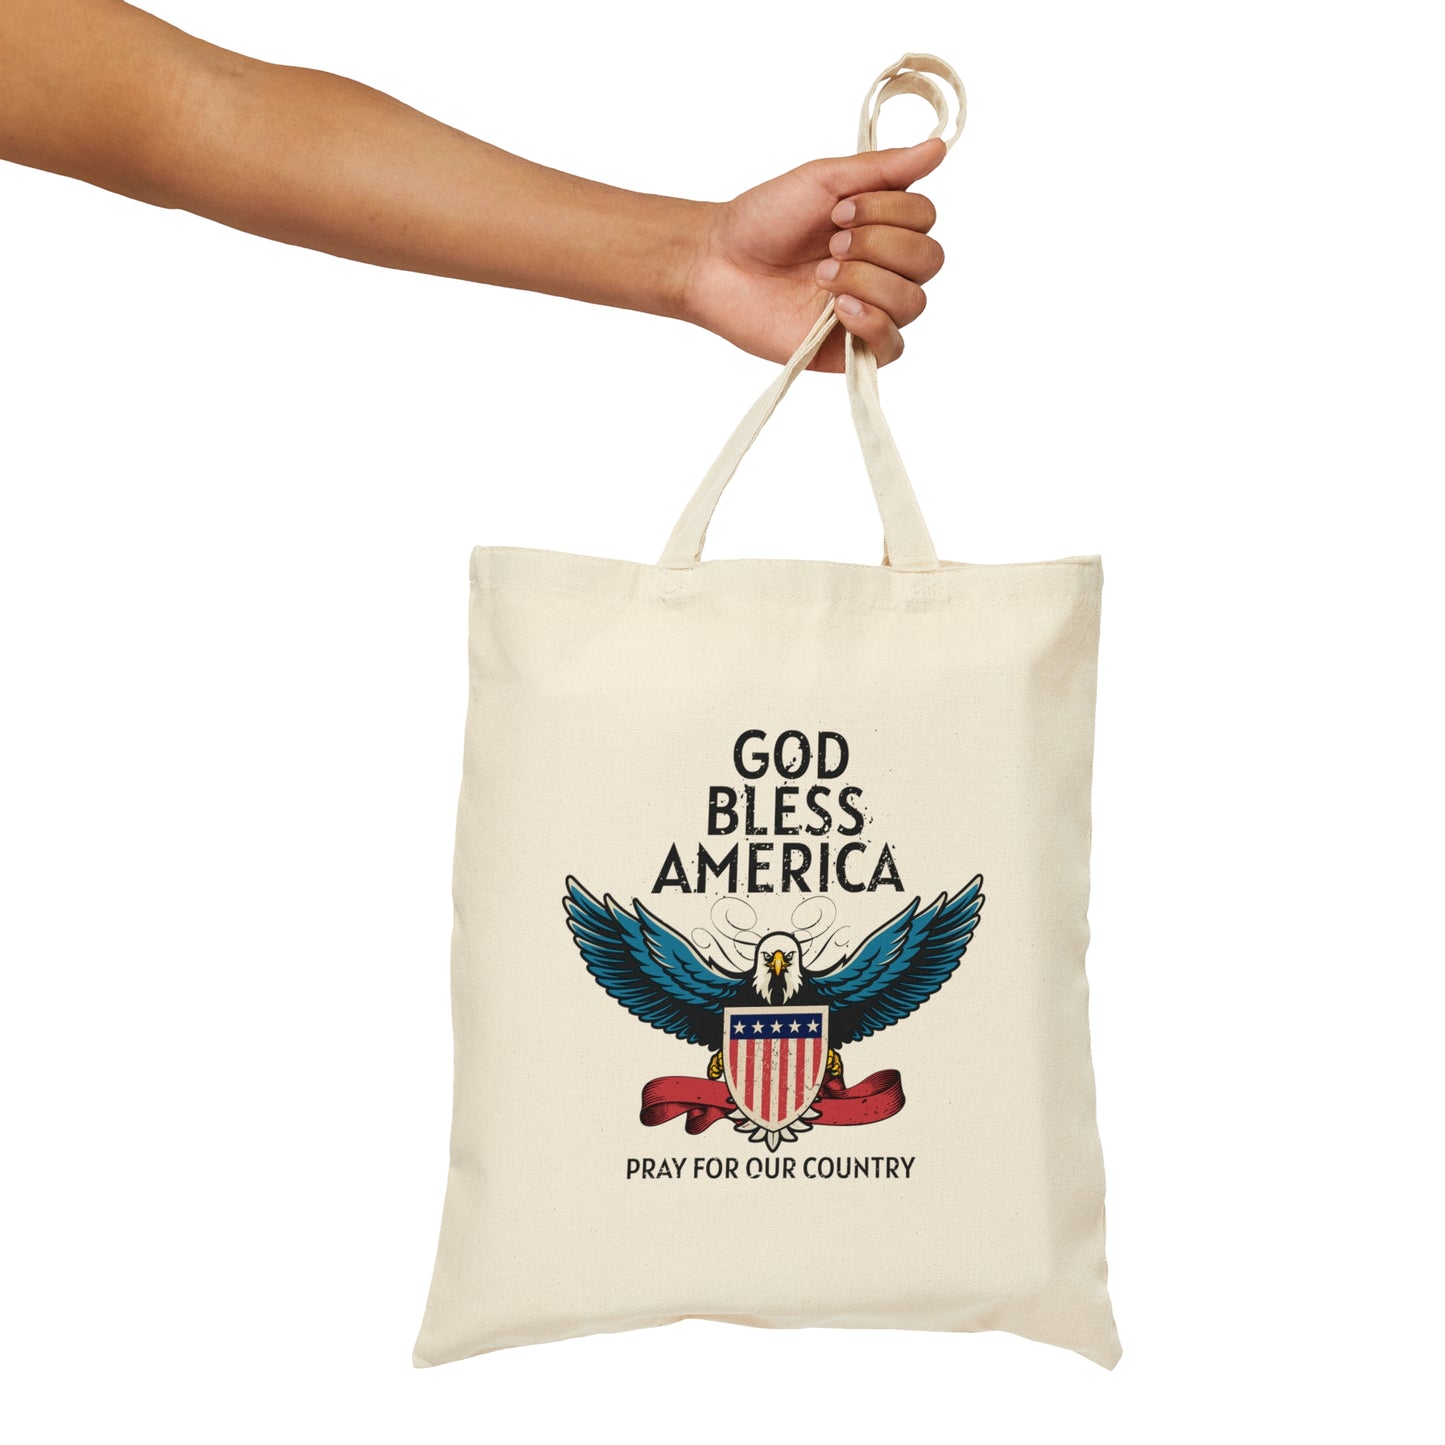 God Bless America Cotton Canvas Tote Bag